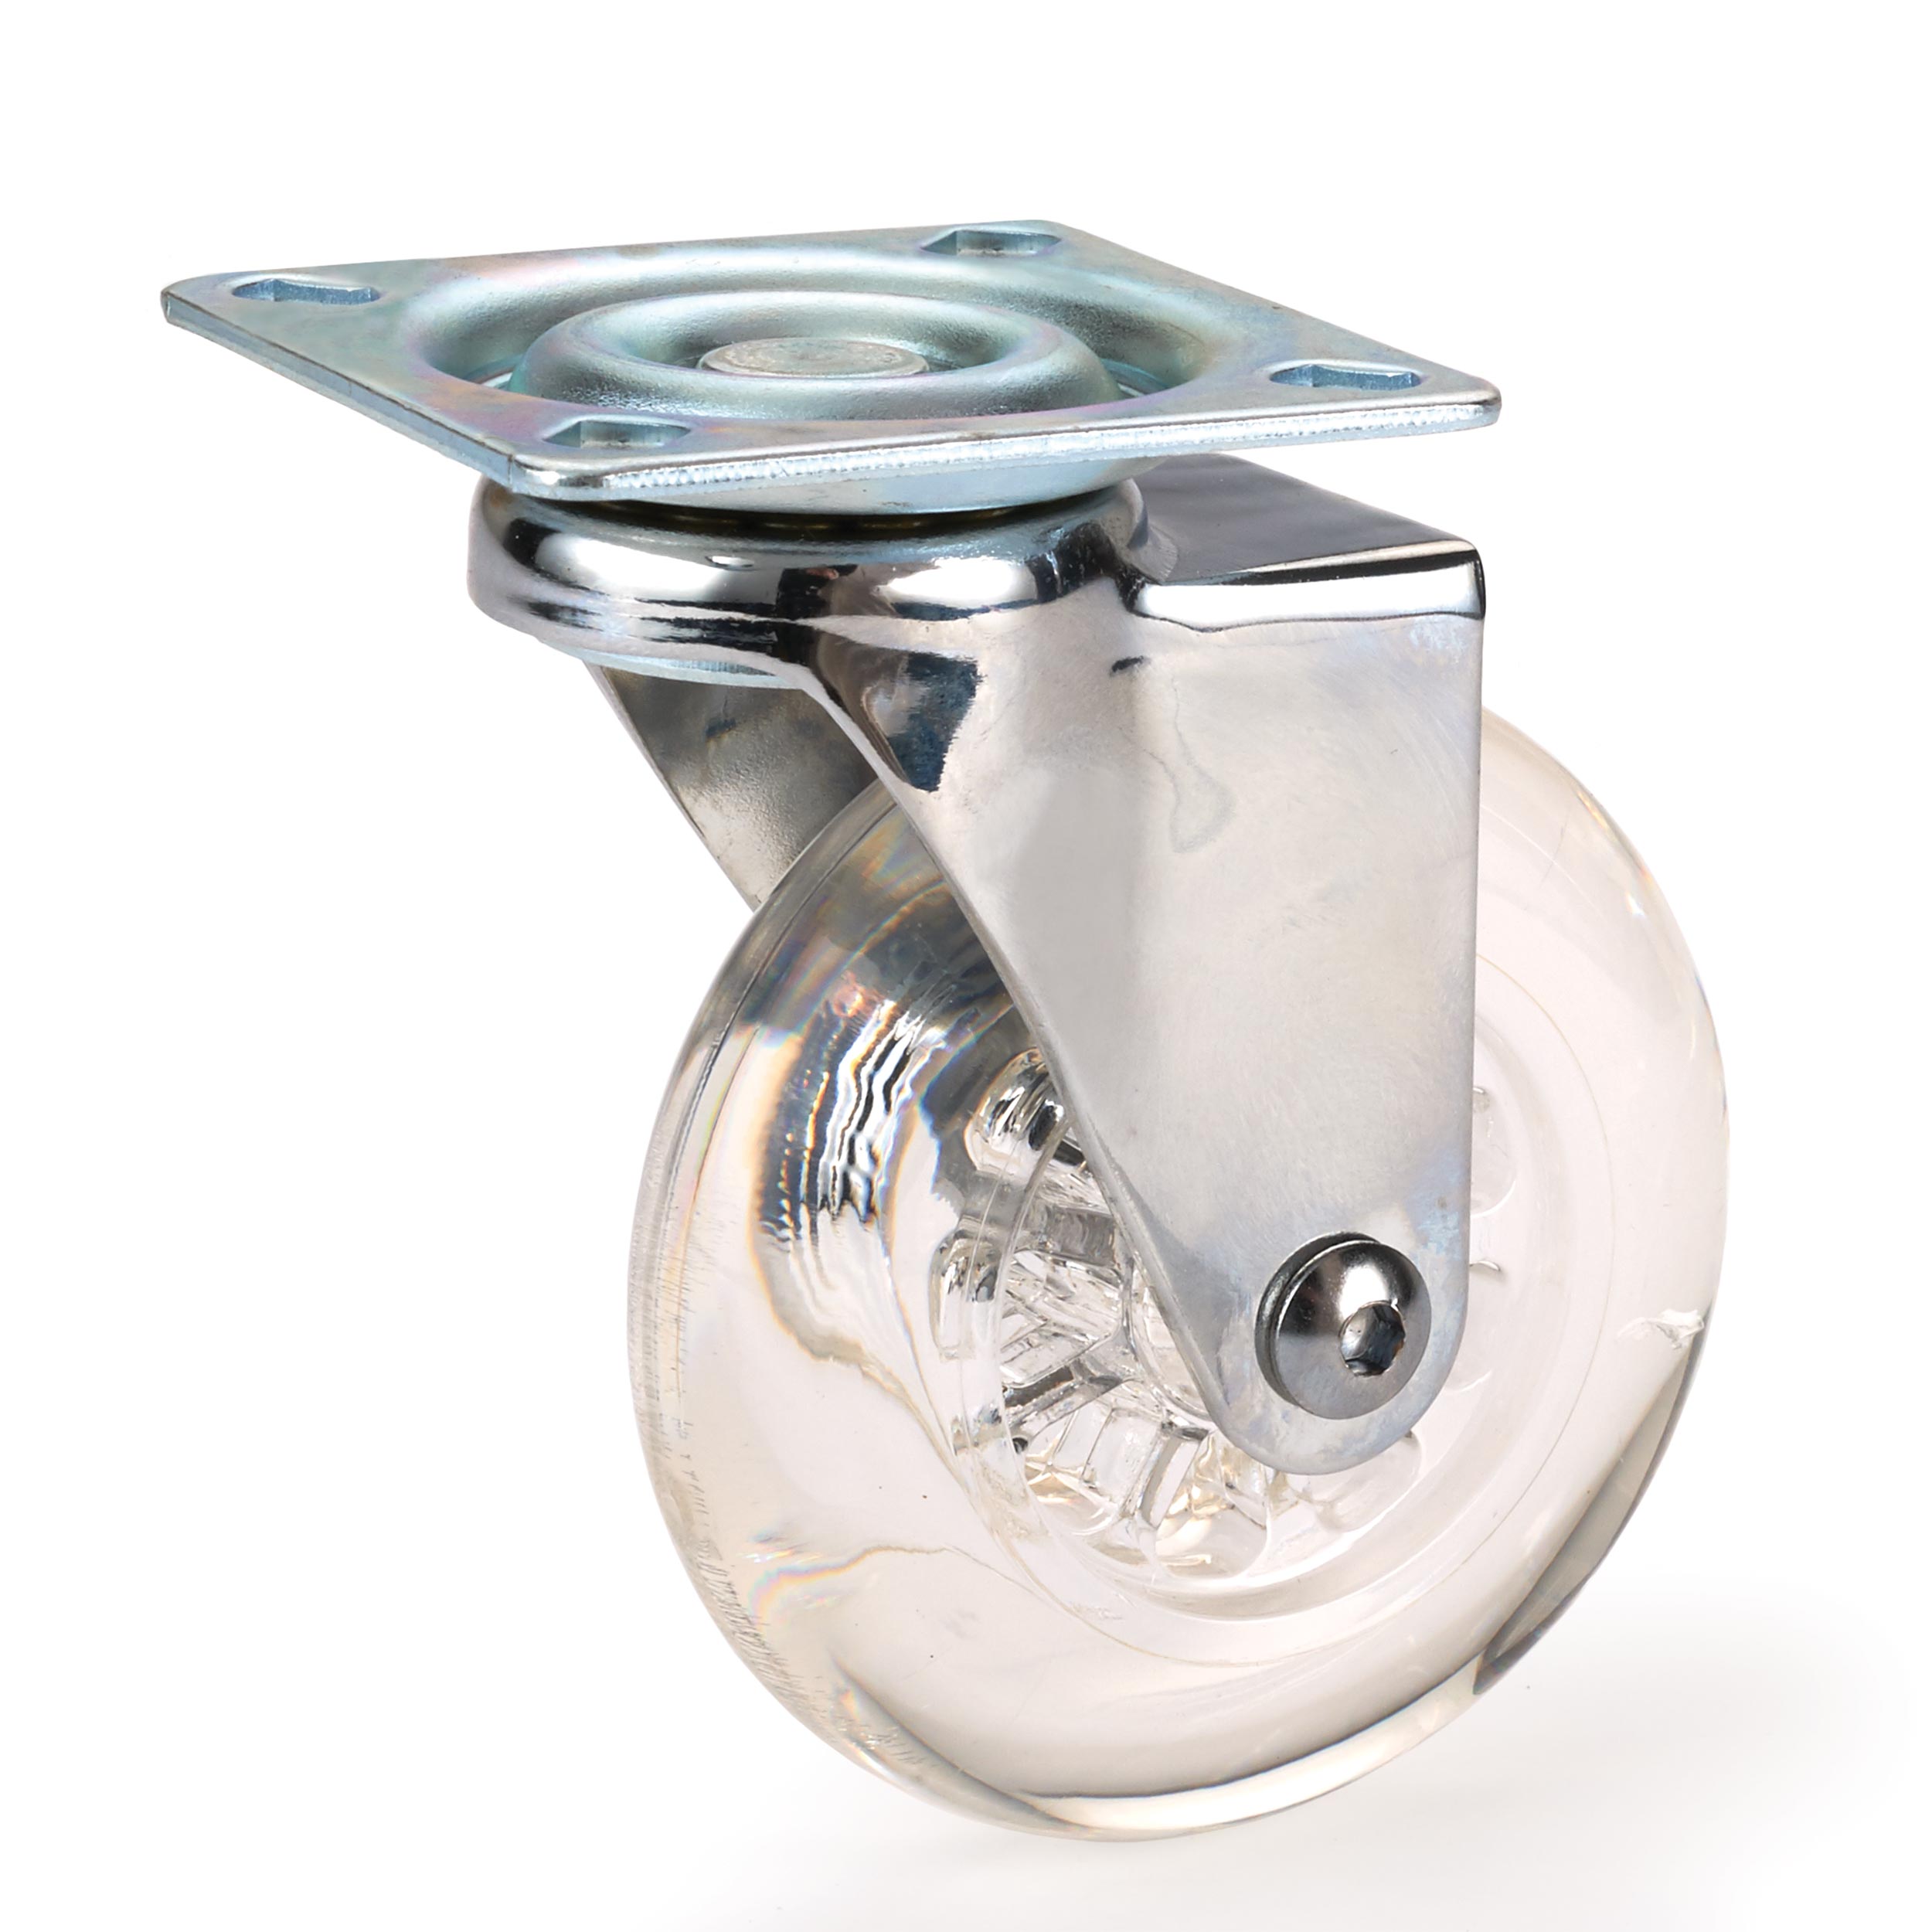 3" Skate Wheel Casters With Rounded Wheel, Translucent, Non-brake